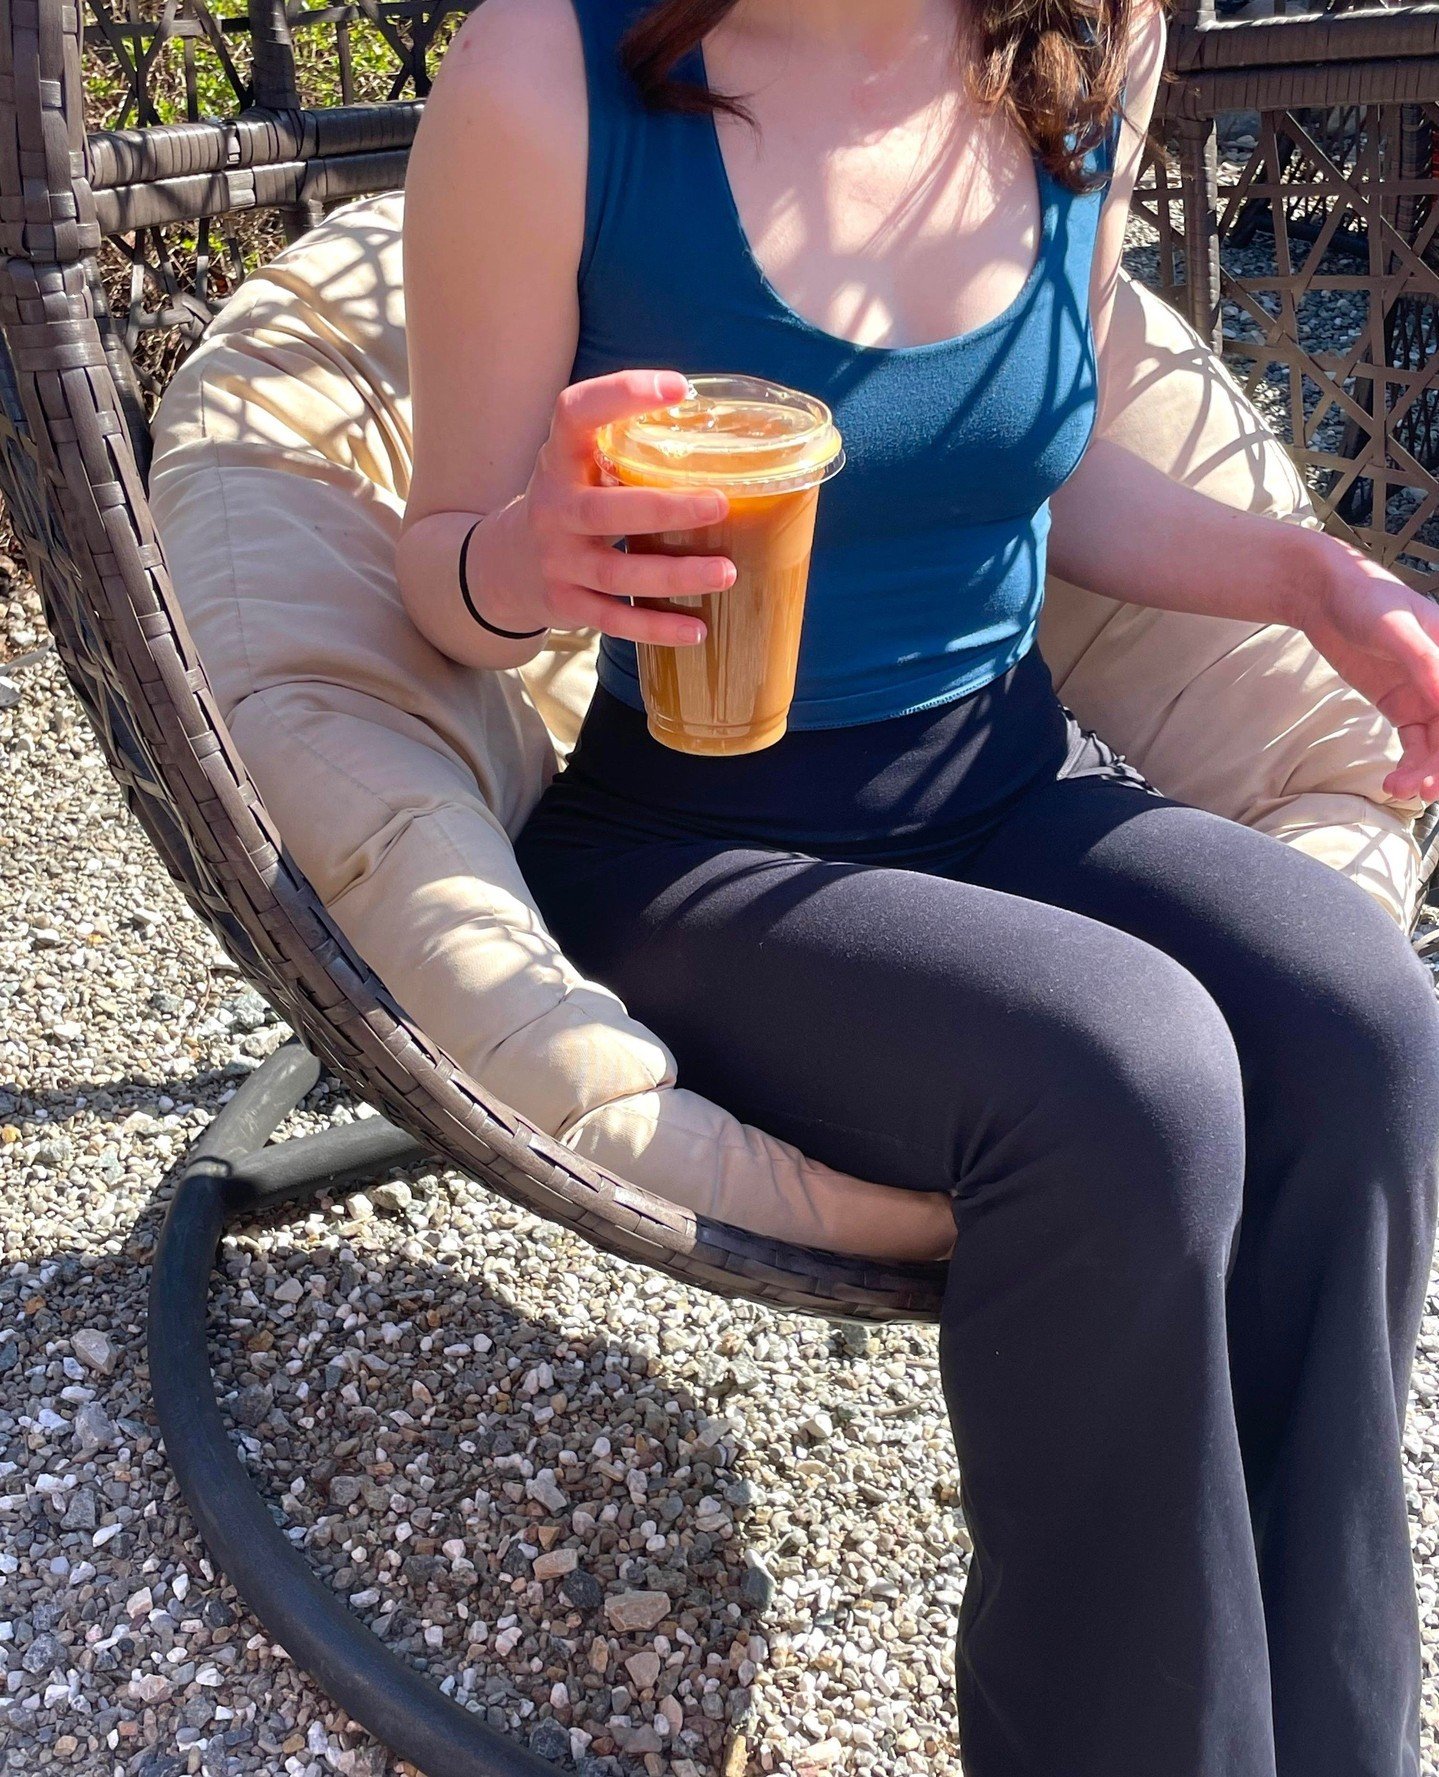 Never let a sunny day go to waste! Seize the day with any of our iced drinks and enjoy the sunshine on our back patio!⁠
⁠
#drinkfeine #icedcoffee #icedlatte #latte #coffeeshop #sunshine #spring